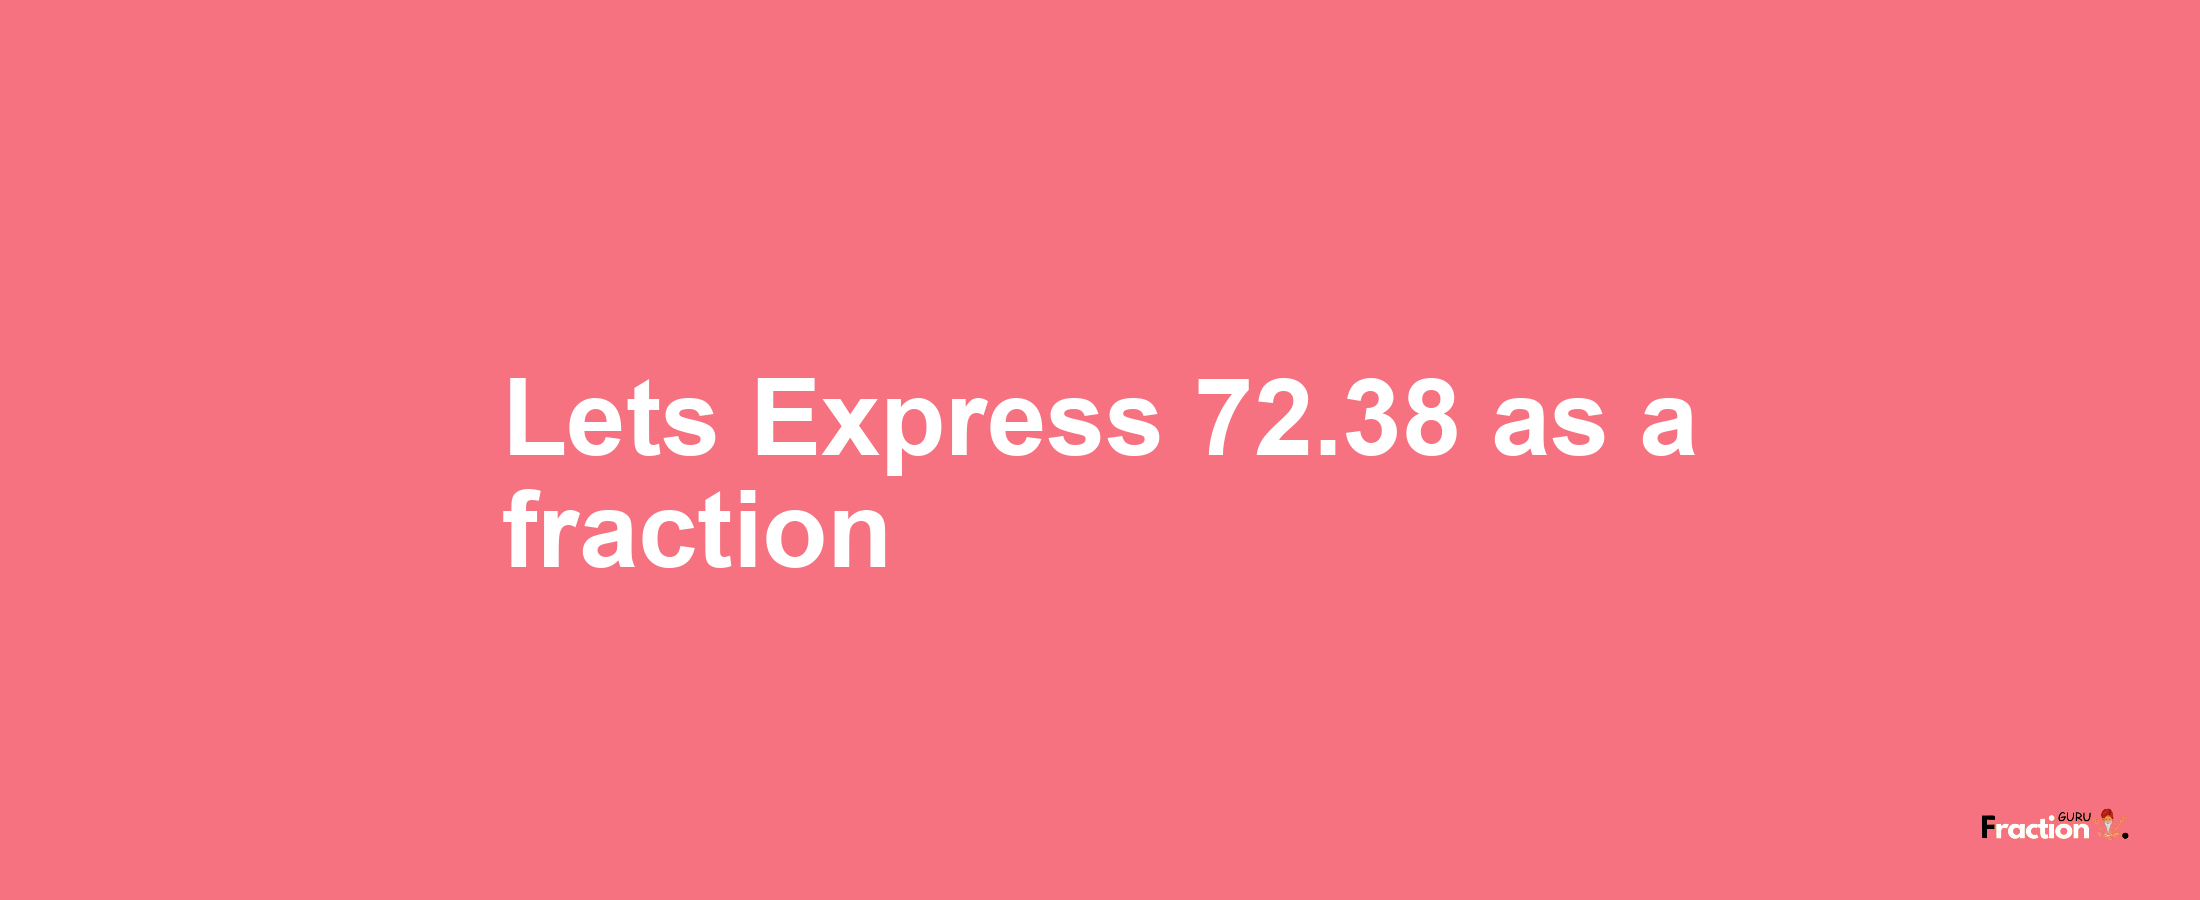 Lets Express 72.38 as afraction